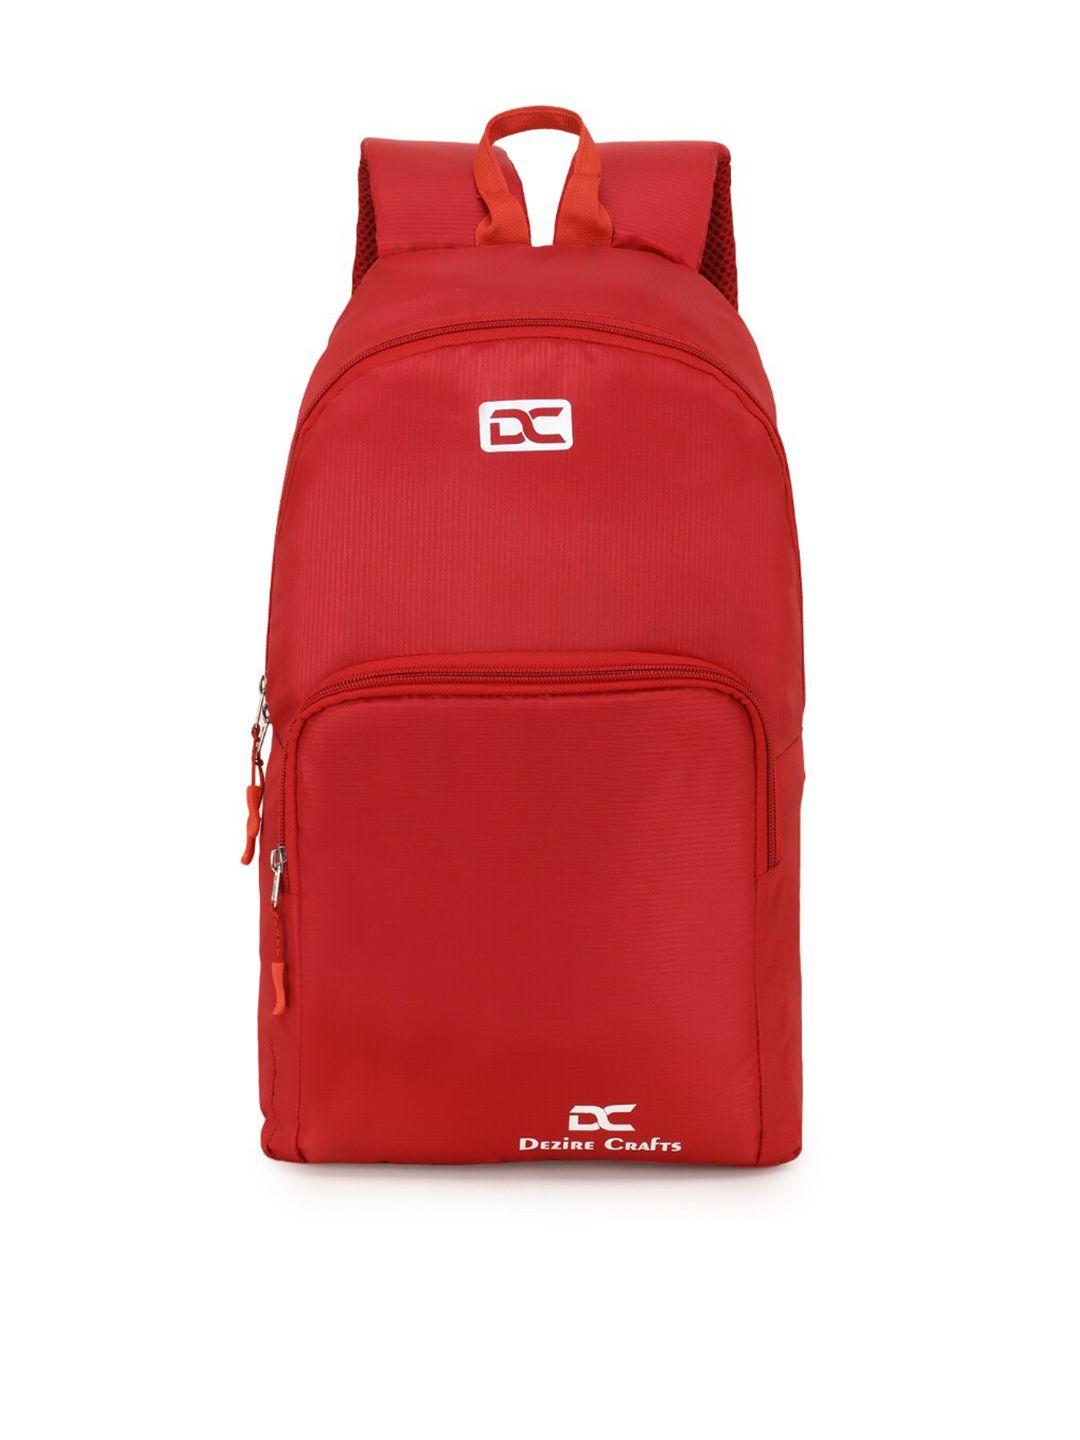 dezire crafts unisex red & white solid backpack